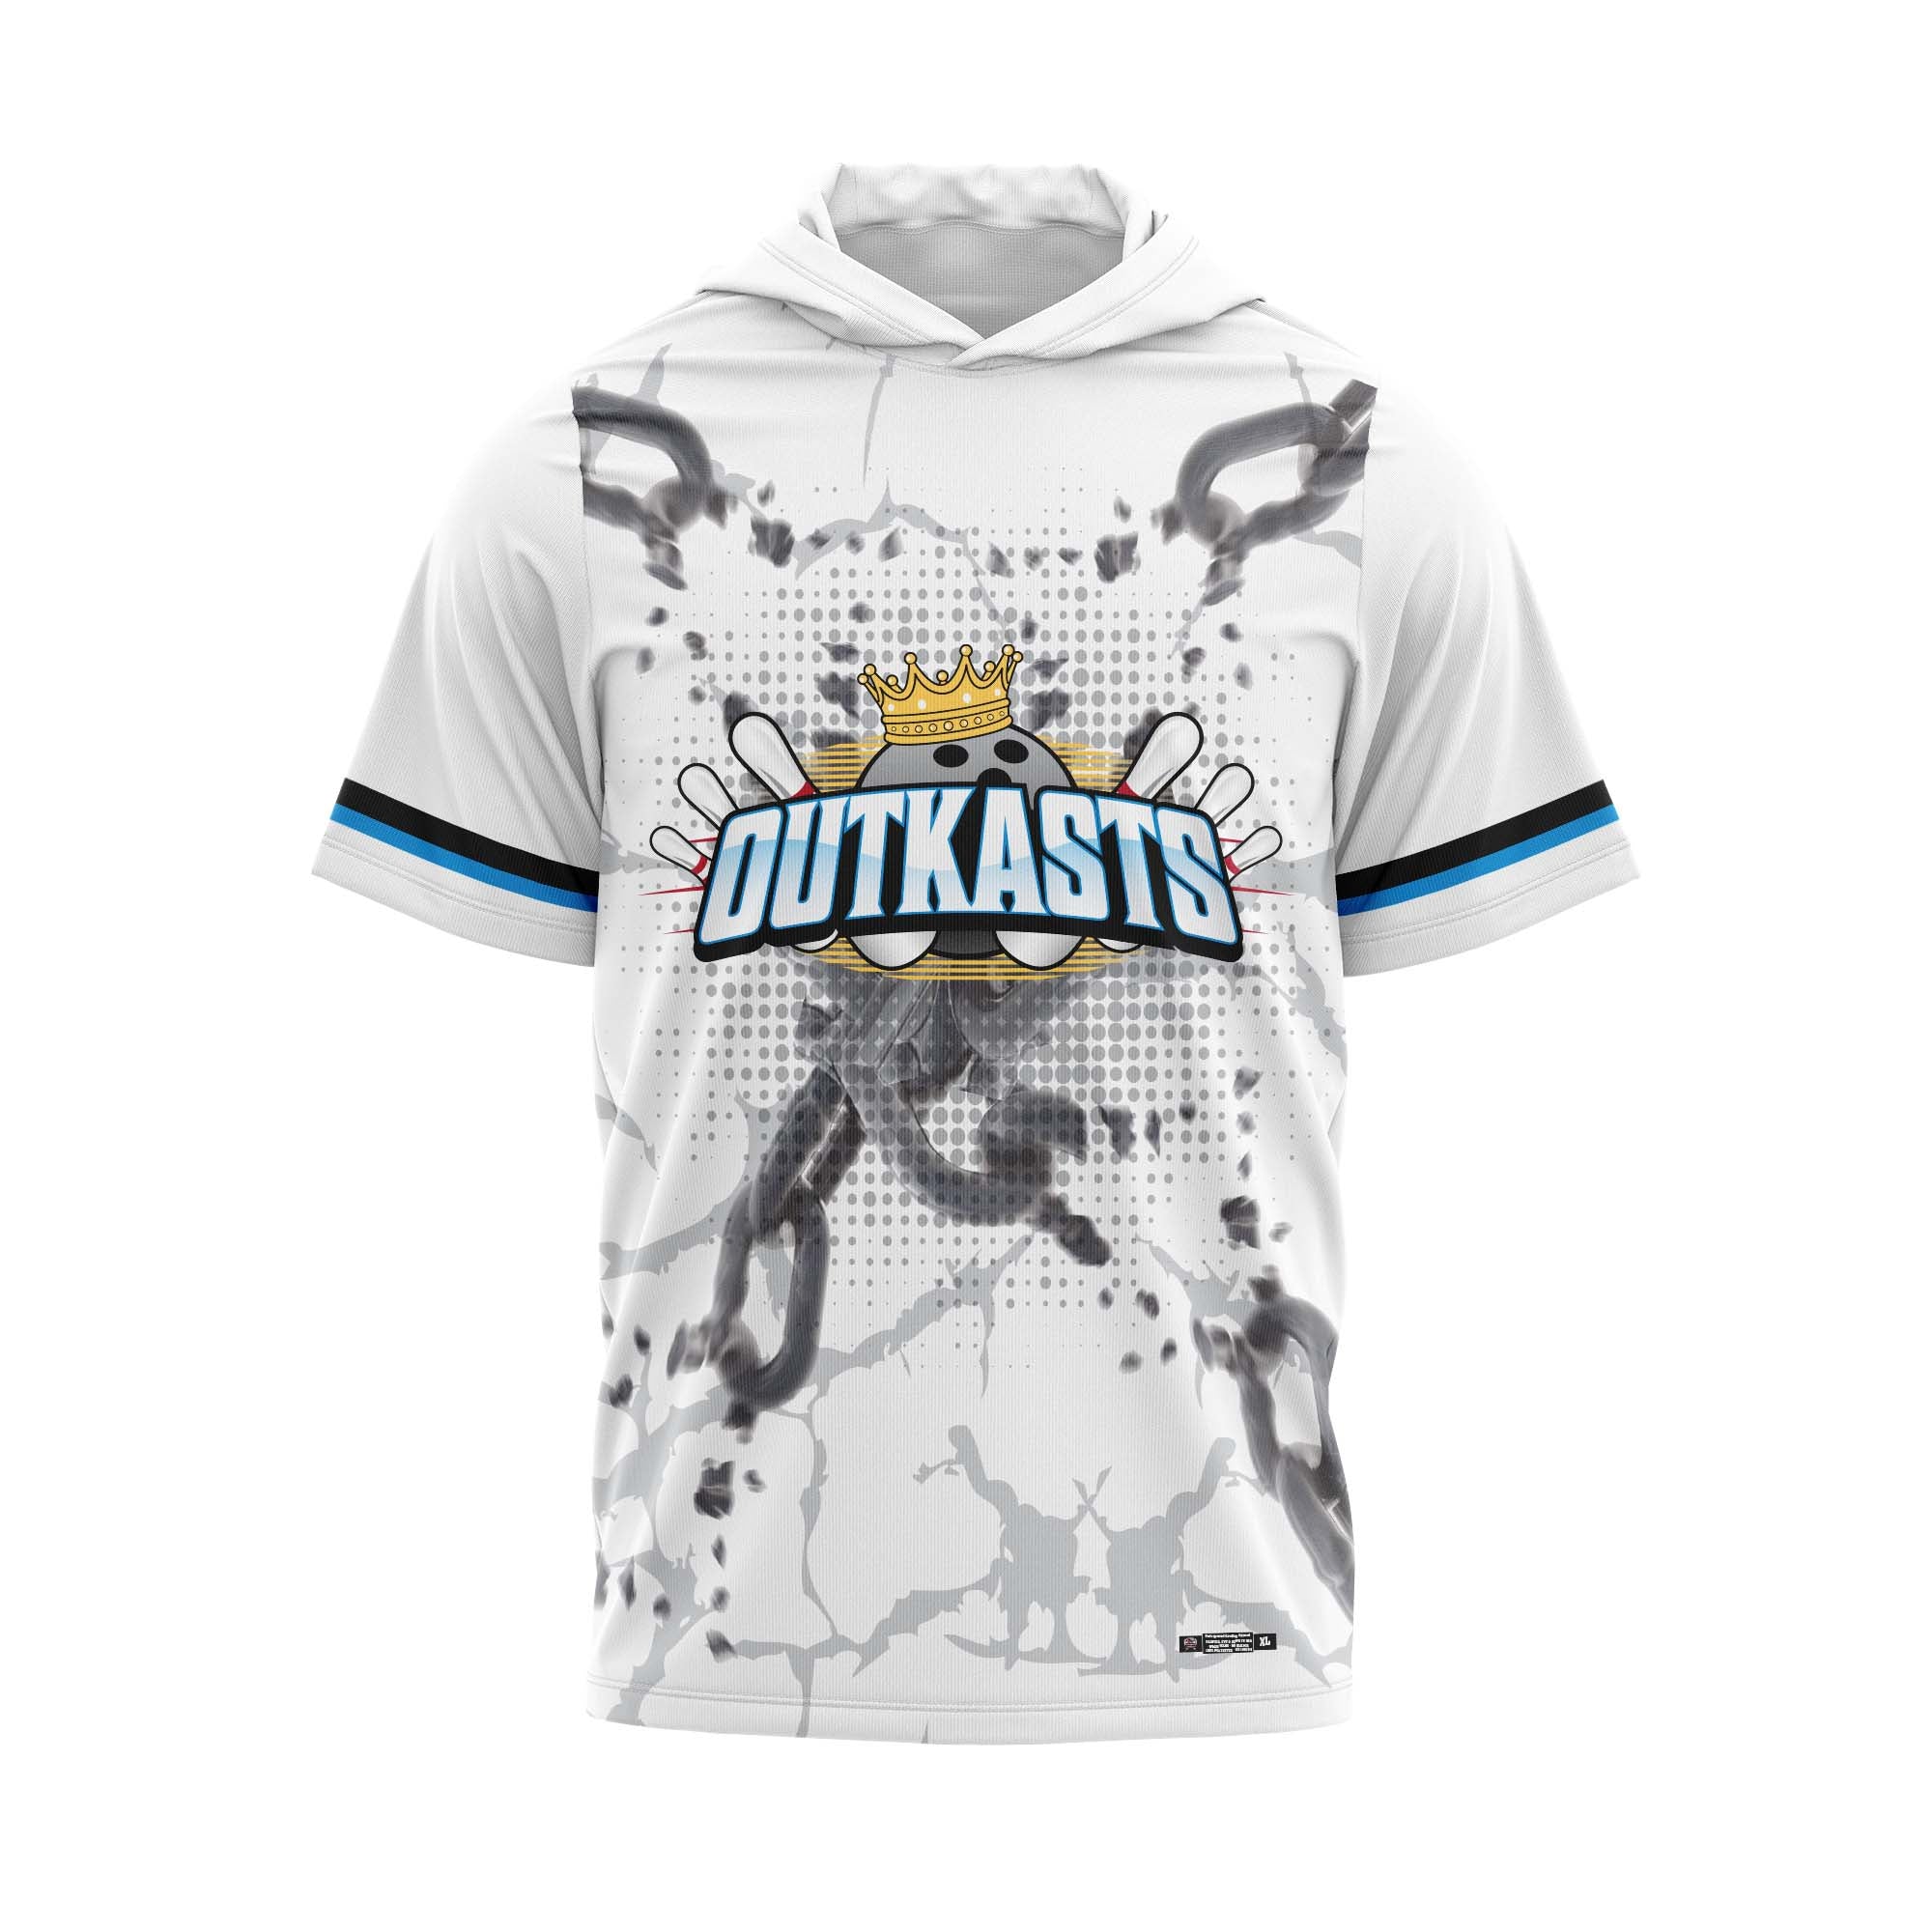 Outkasts White Jersey